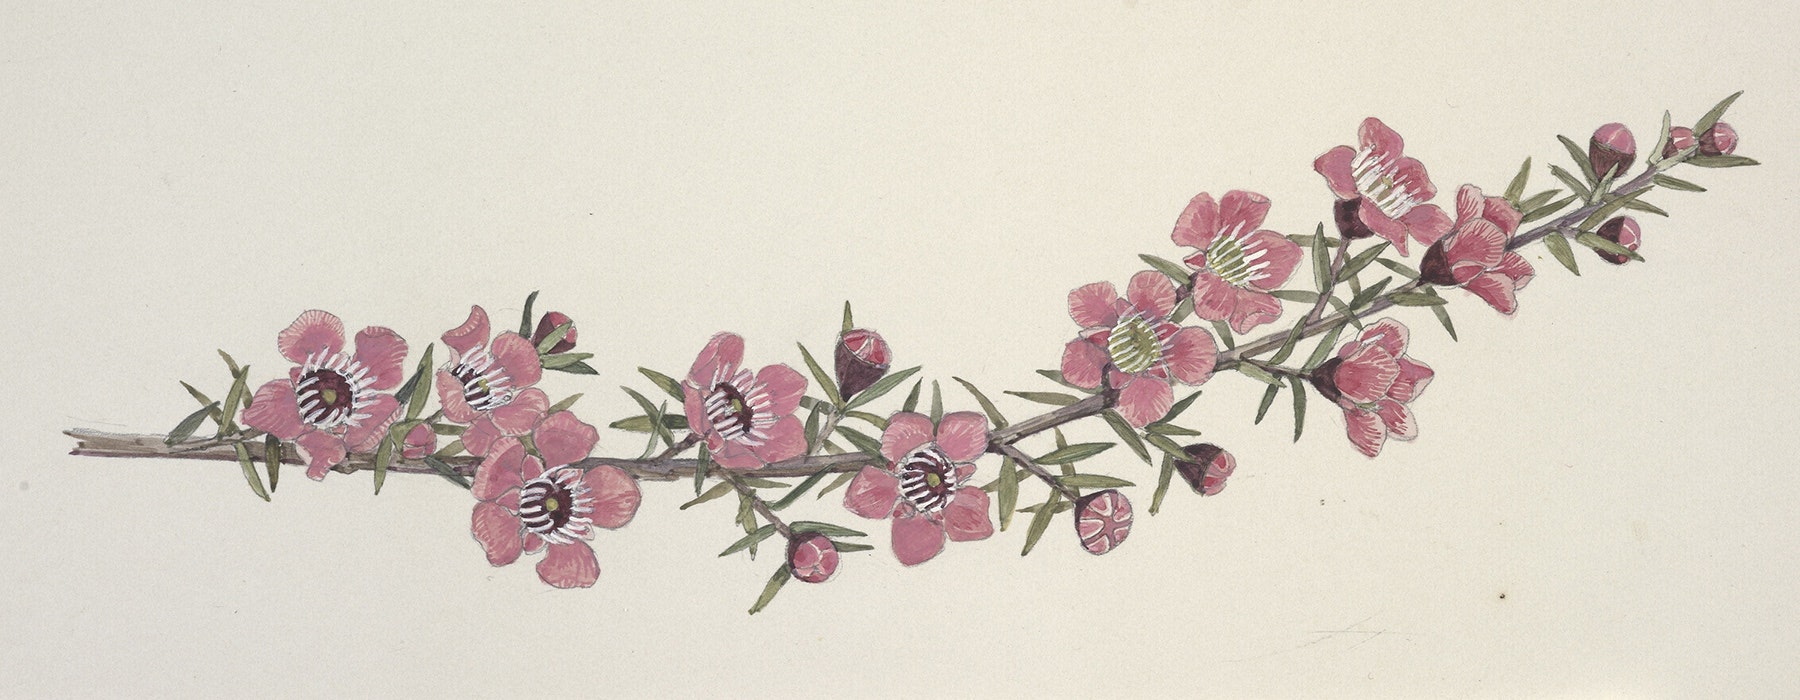 A watercolour of a branch of a plant with lots of pink flowers on it.